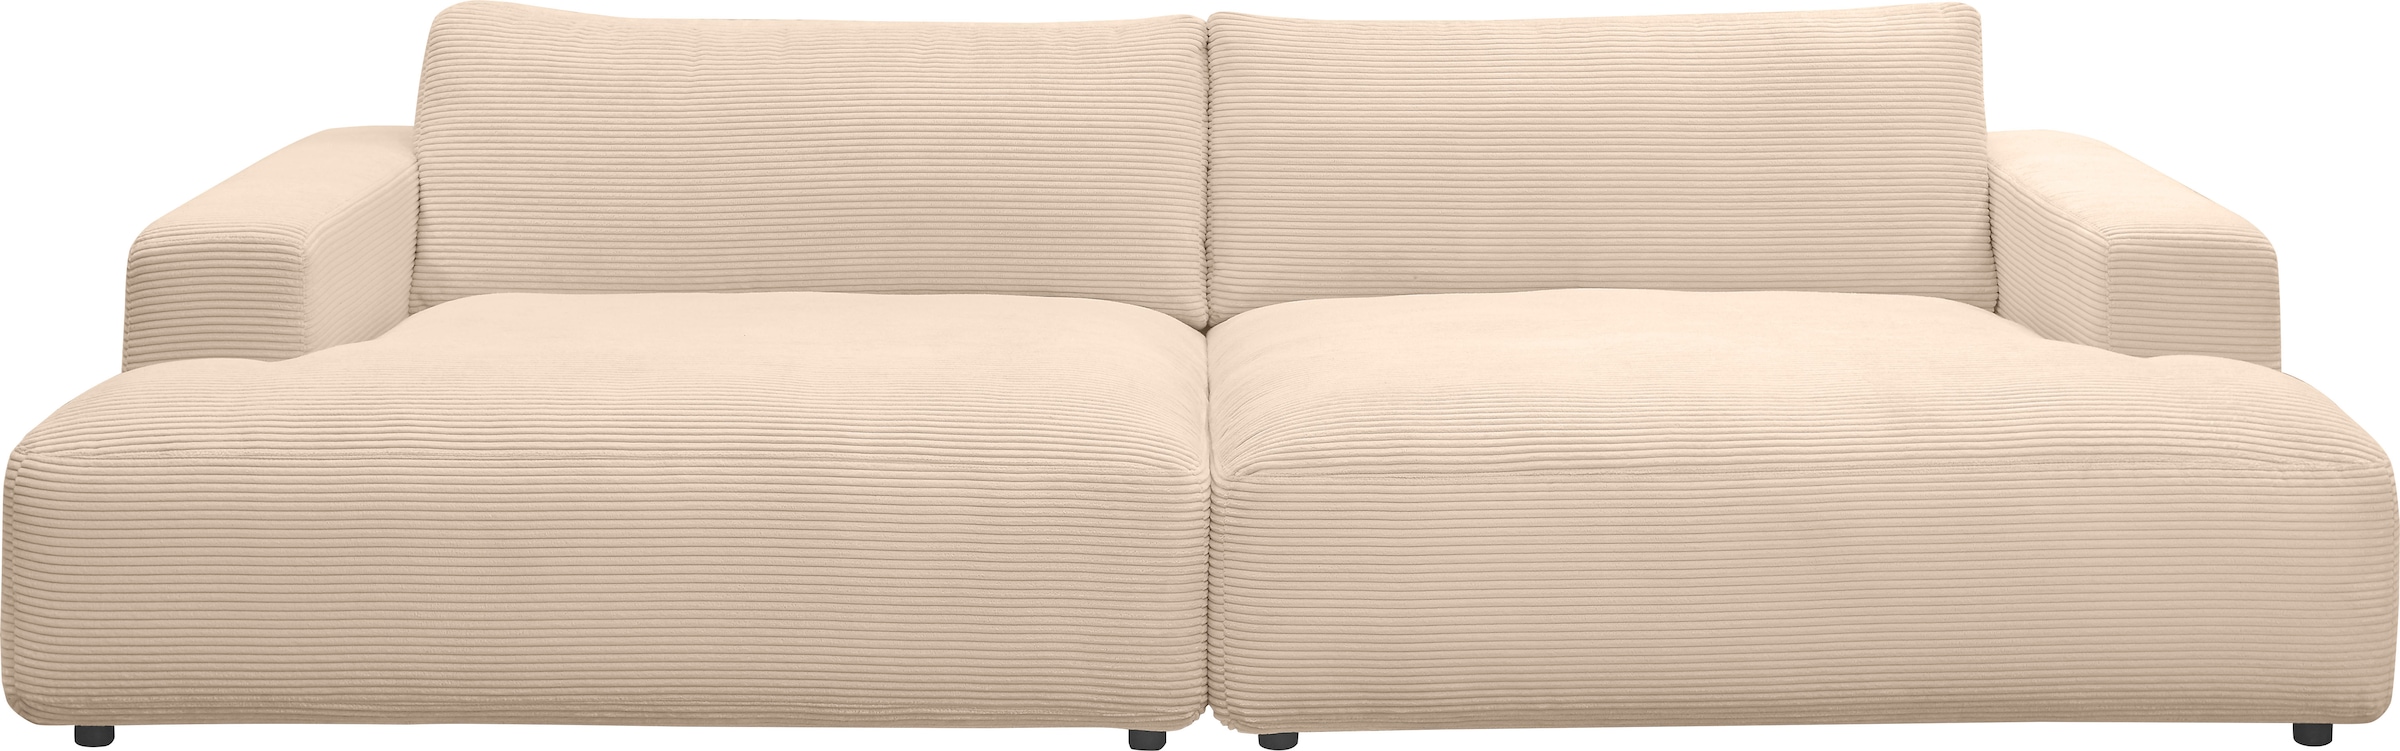 GALLERY M branded by Musterring cm 292 »Lucia«, Breite bequem Loungesofa kaufen Cord-Bezug